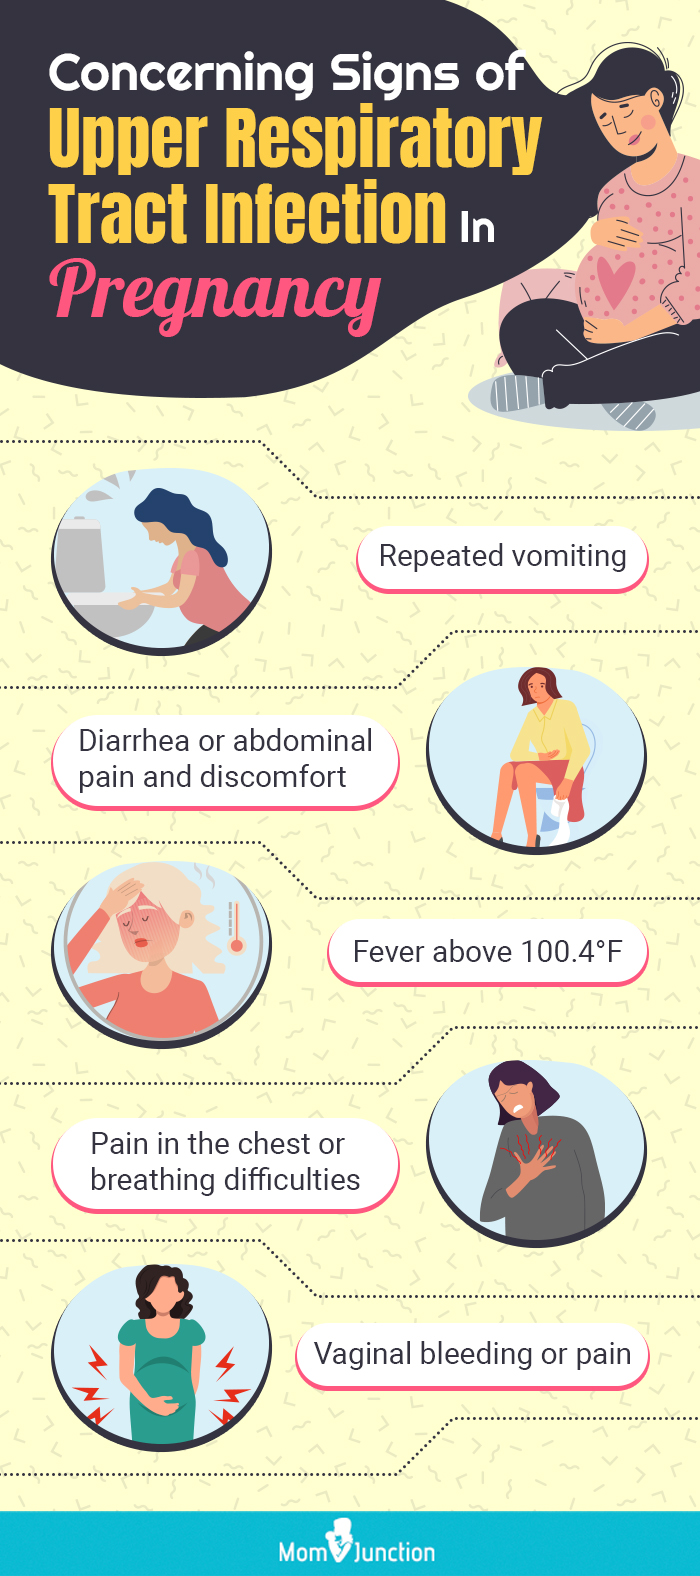 concerning signs of upper respiratory tract infection in pregnancy [infographic]